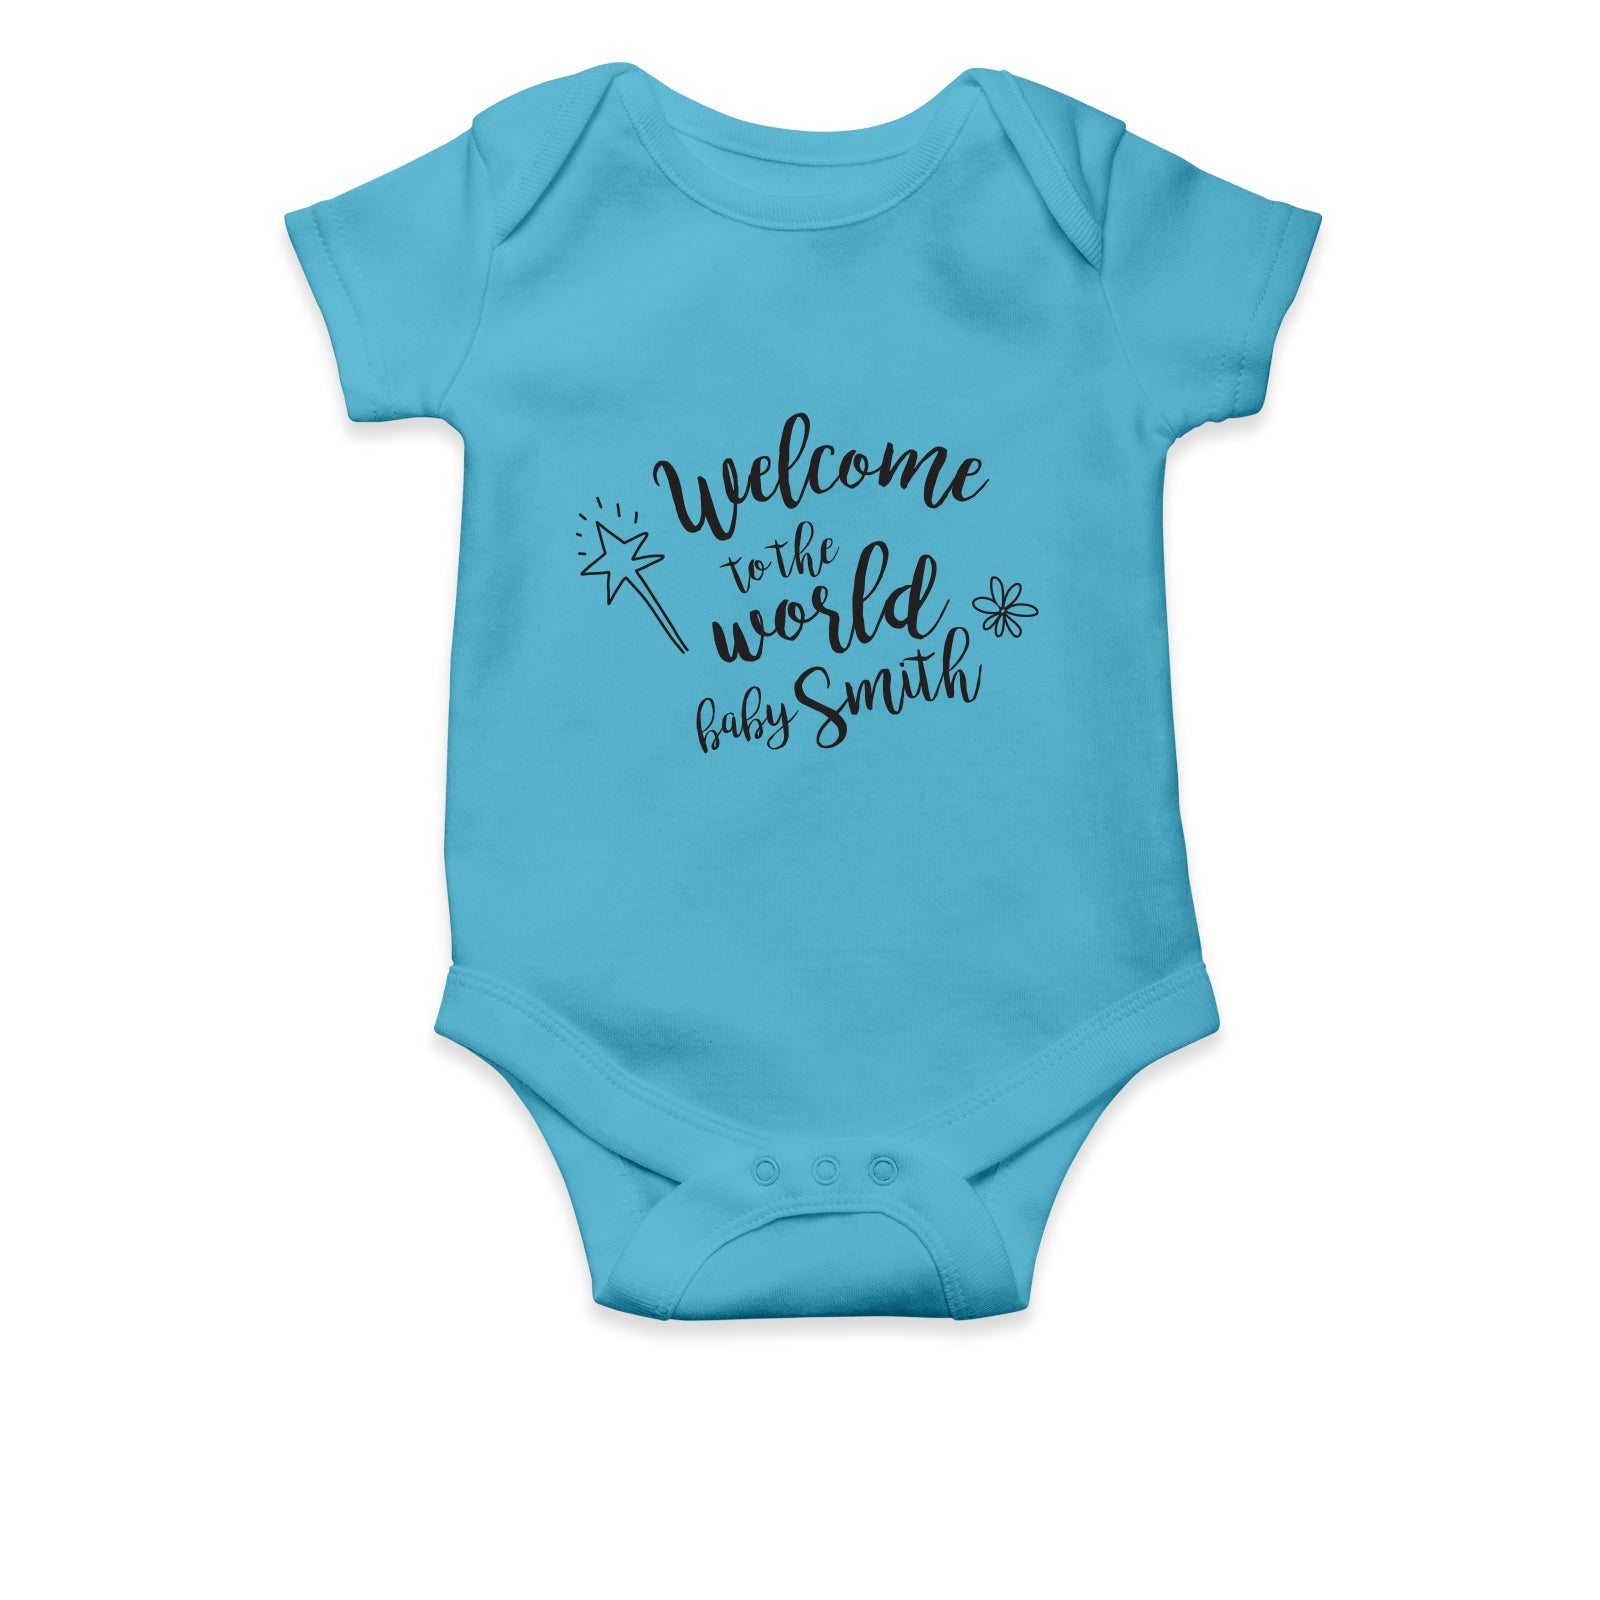 Personalised White Baby Body Suit Grow Vest - Small Wand